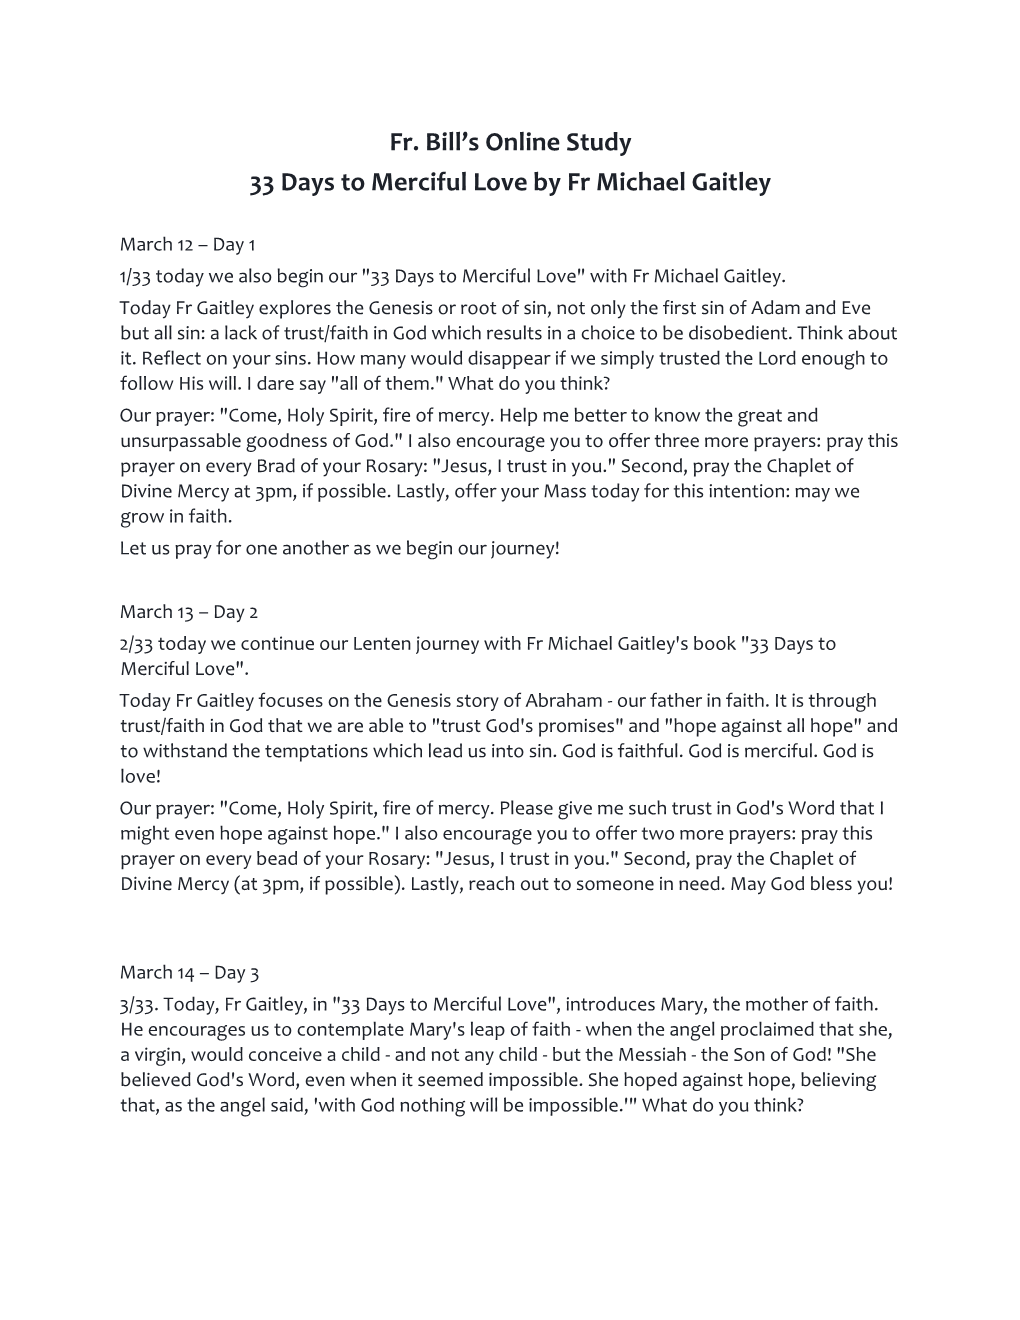 Fr. Bill's Online Study 33 Days to Merciful Love by Fr Michael Gaitley